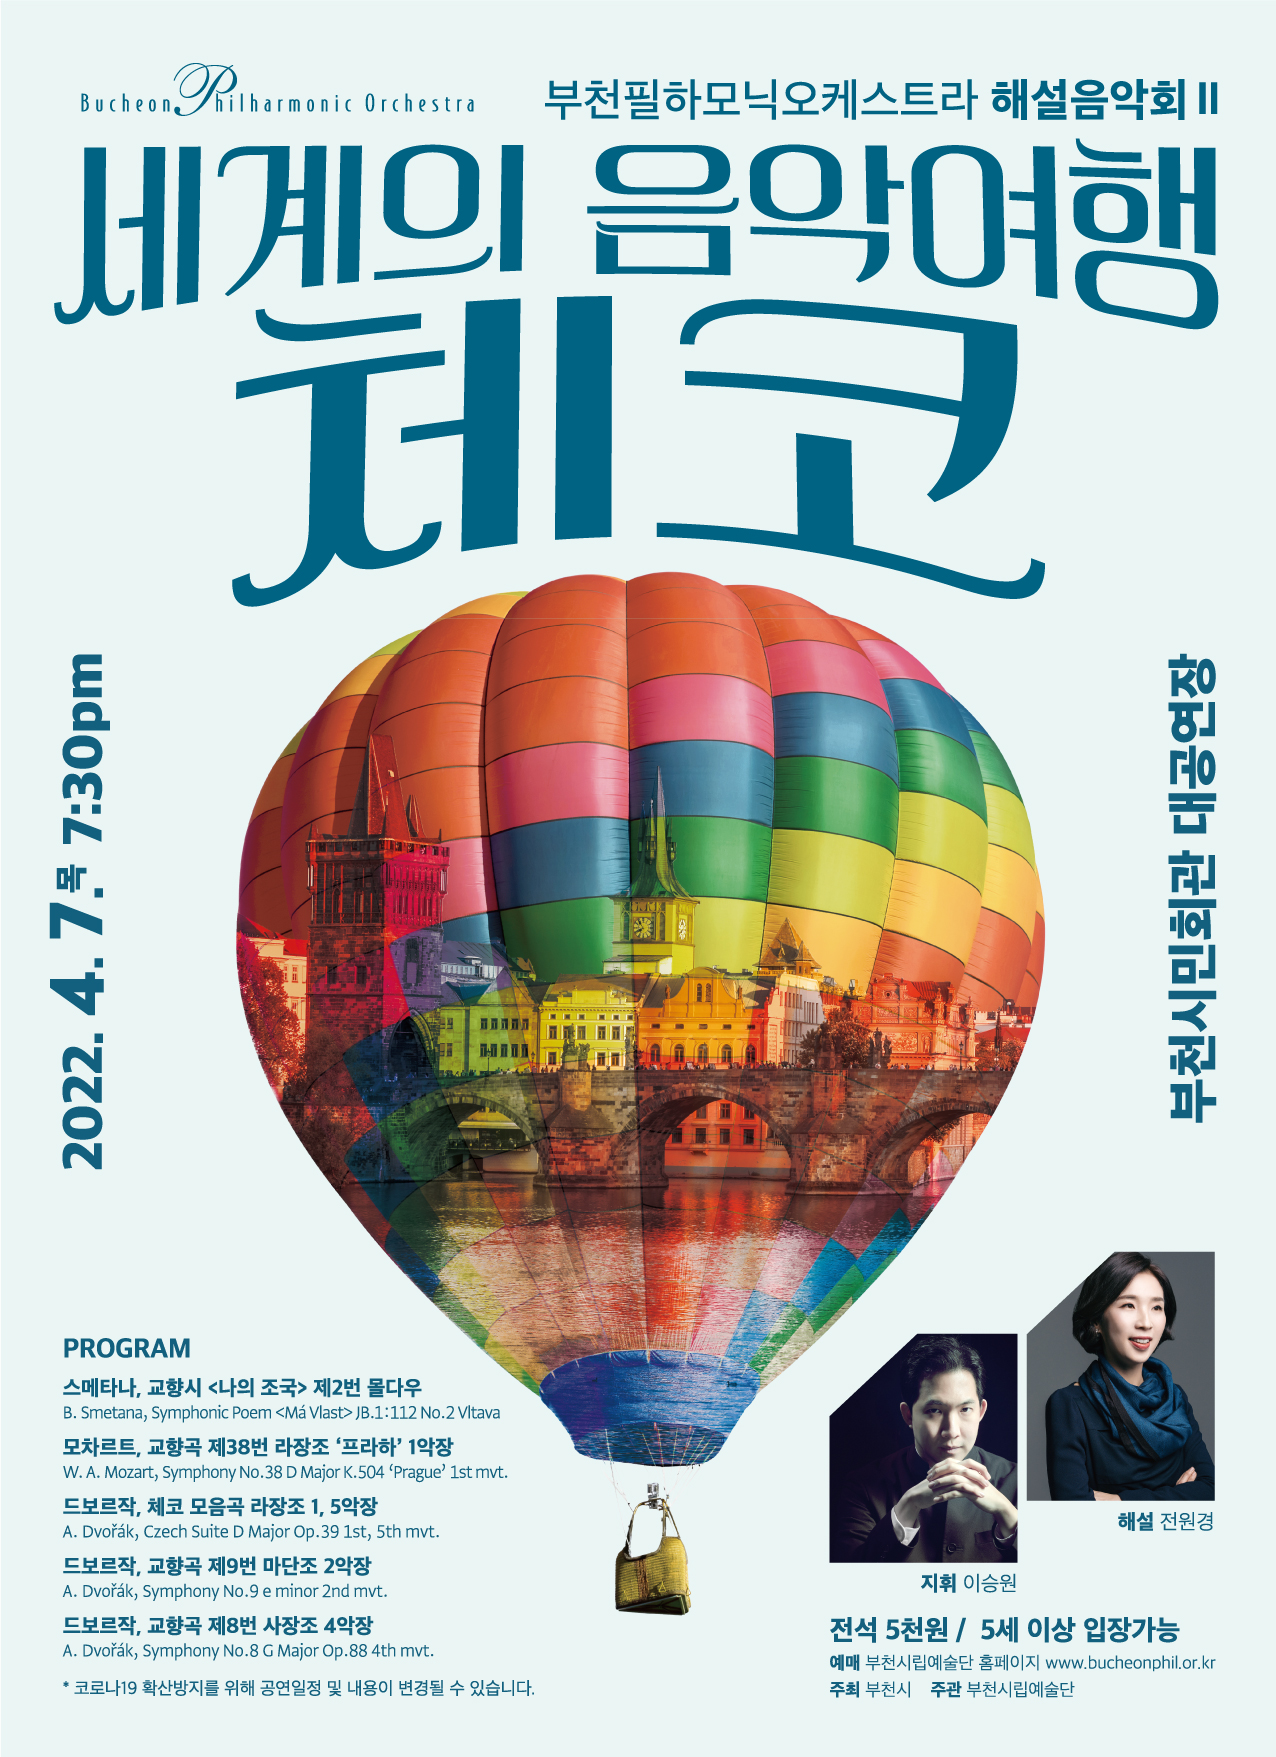 [4.7]Bucheon Philharmonic Orchestra Lecture Concert II